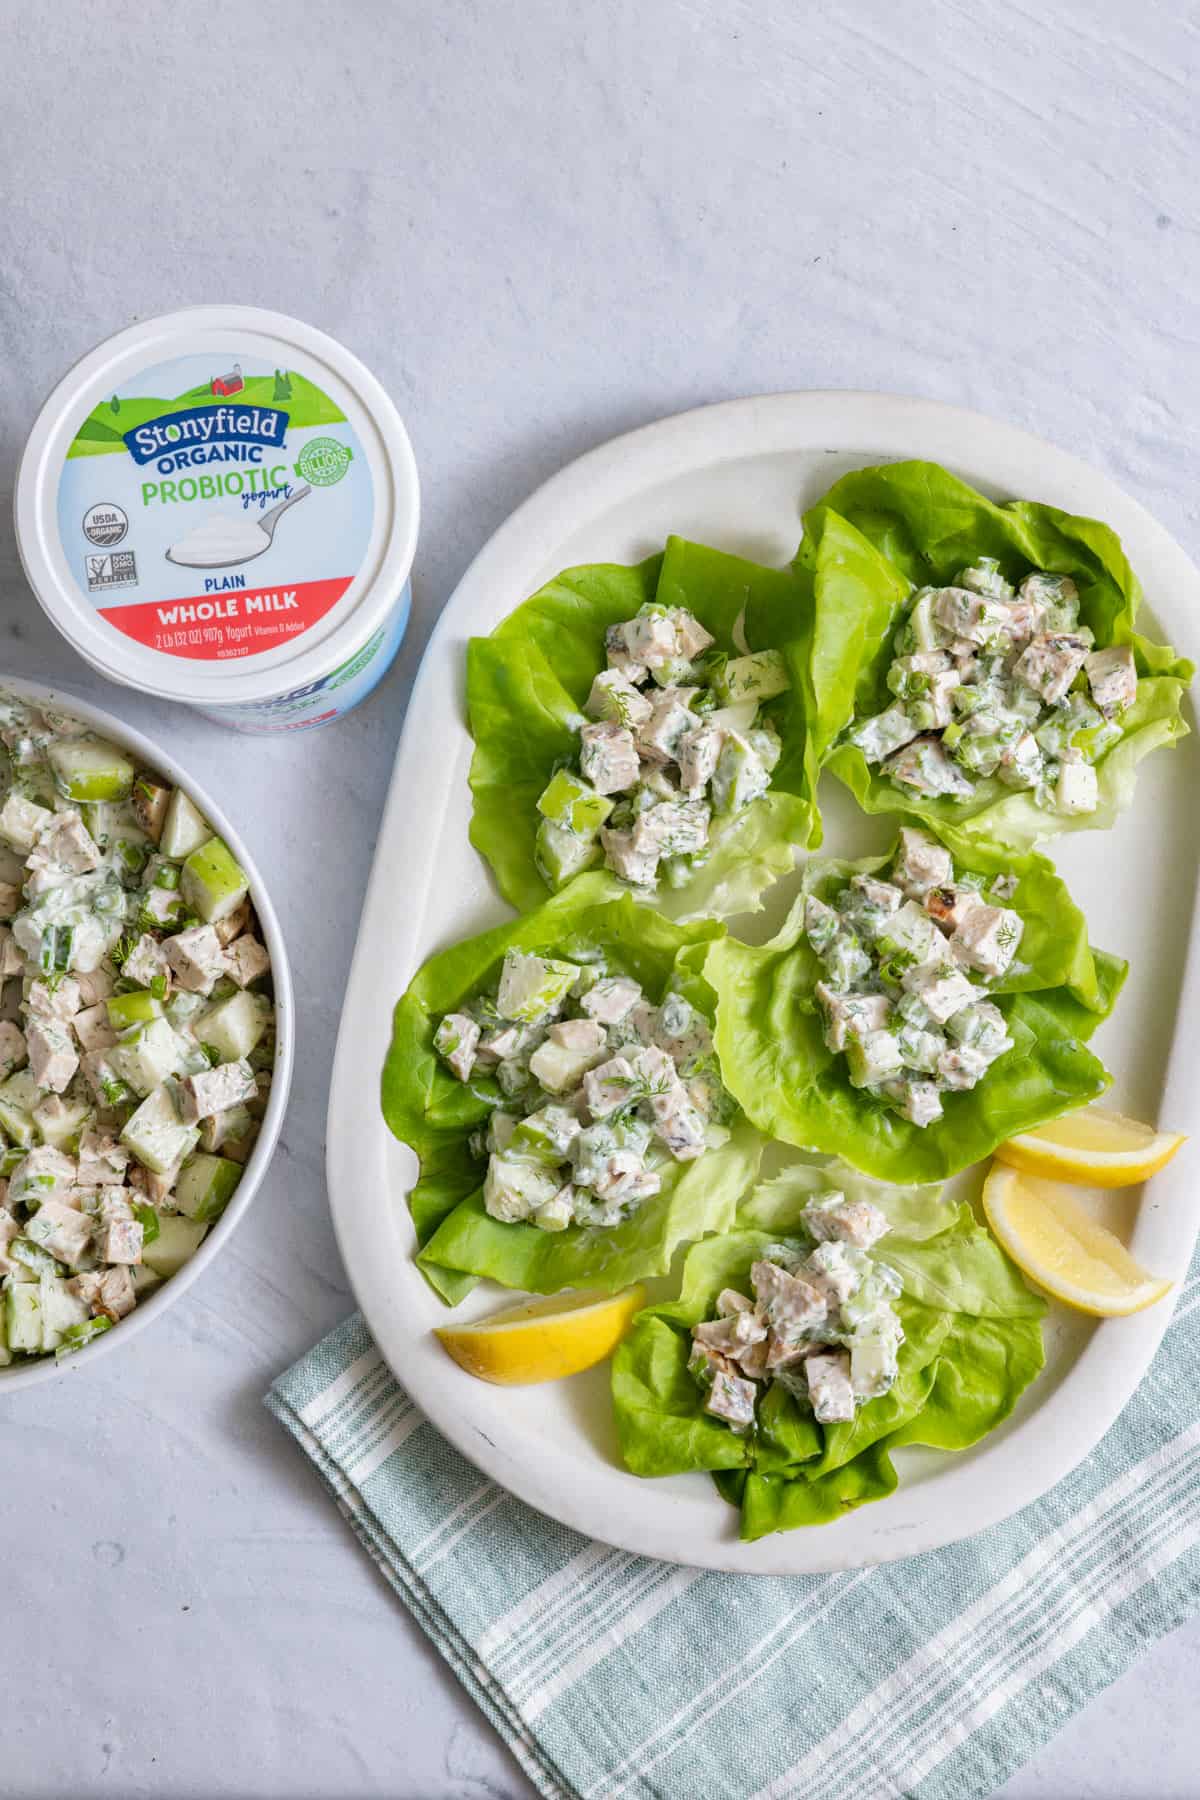 Top view of chicken salad in tubs of lettuce with Stonyfield yogurt.